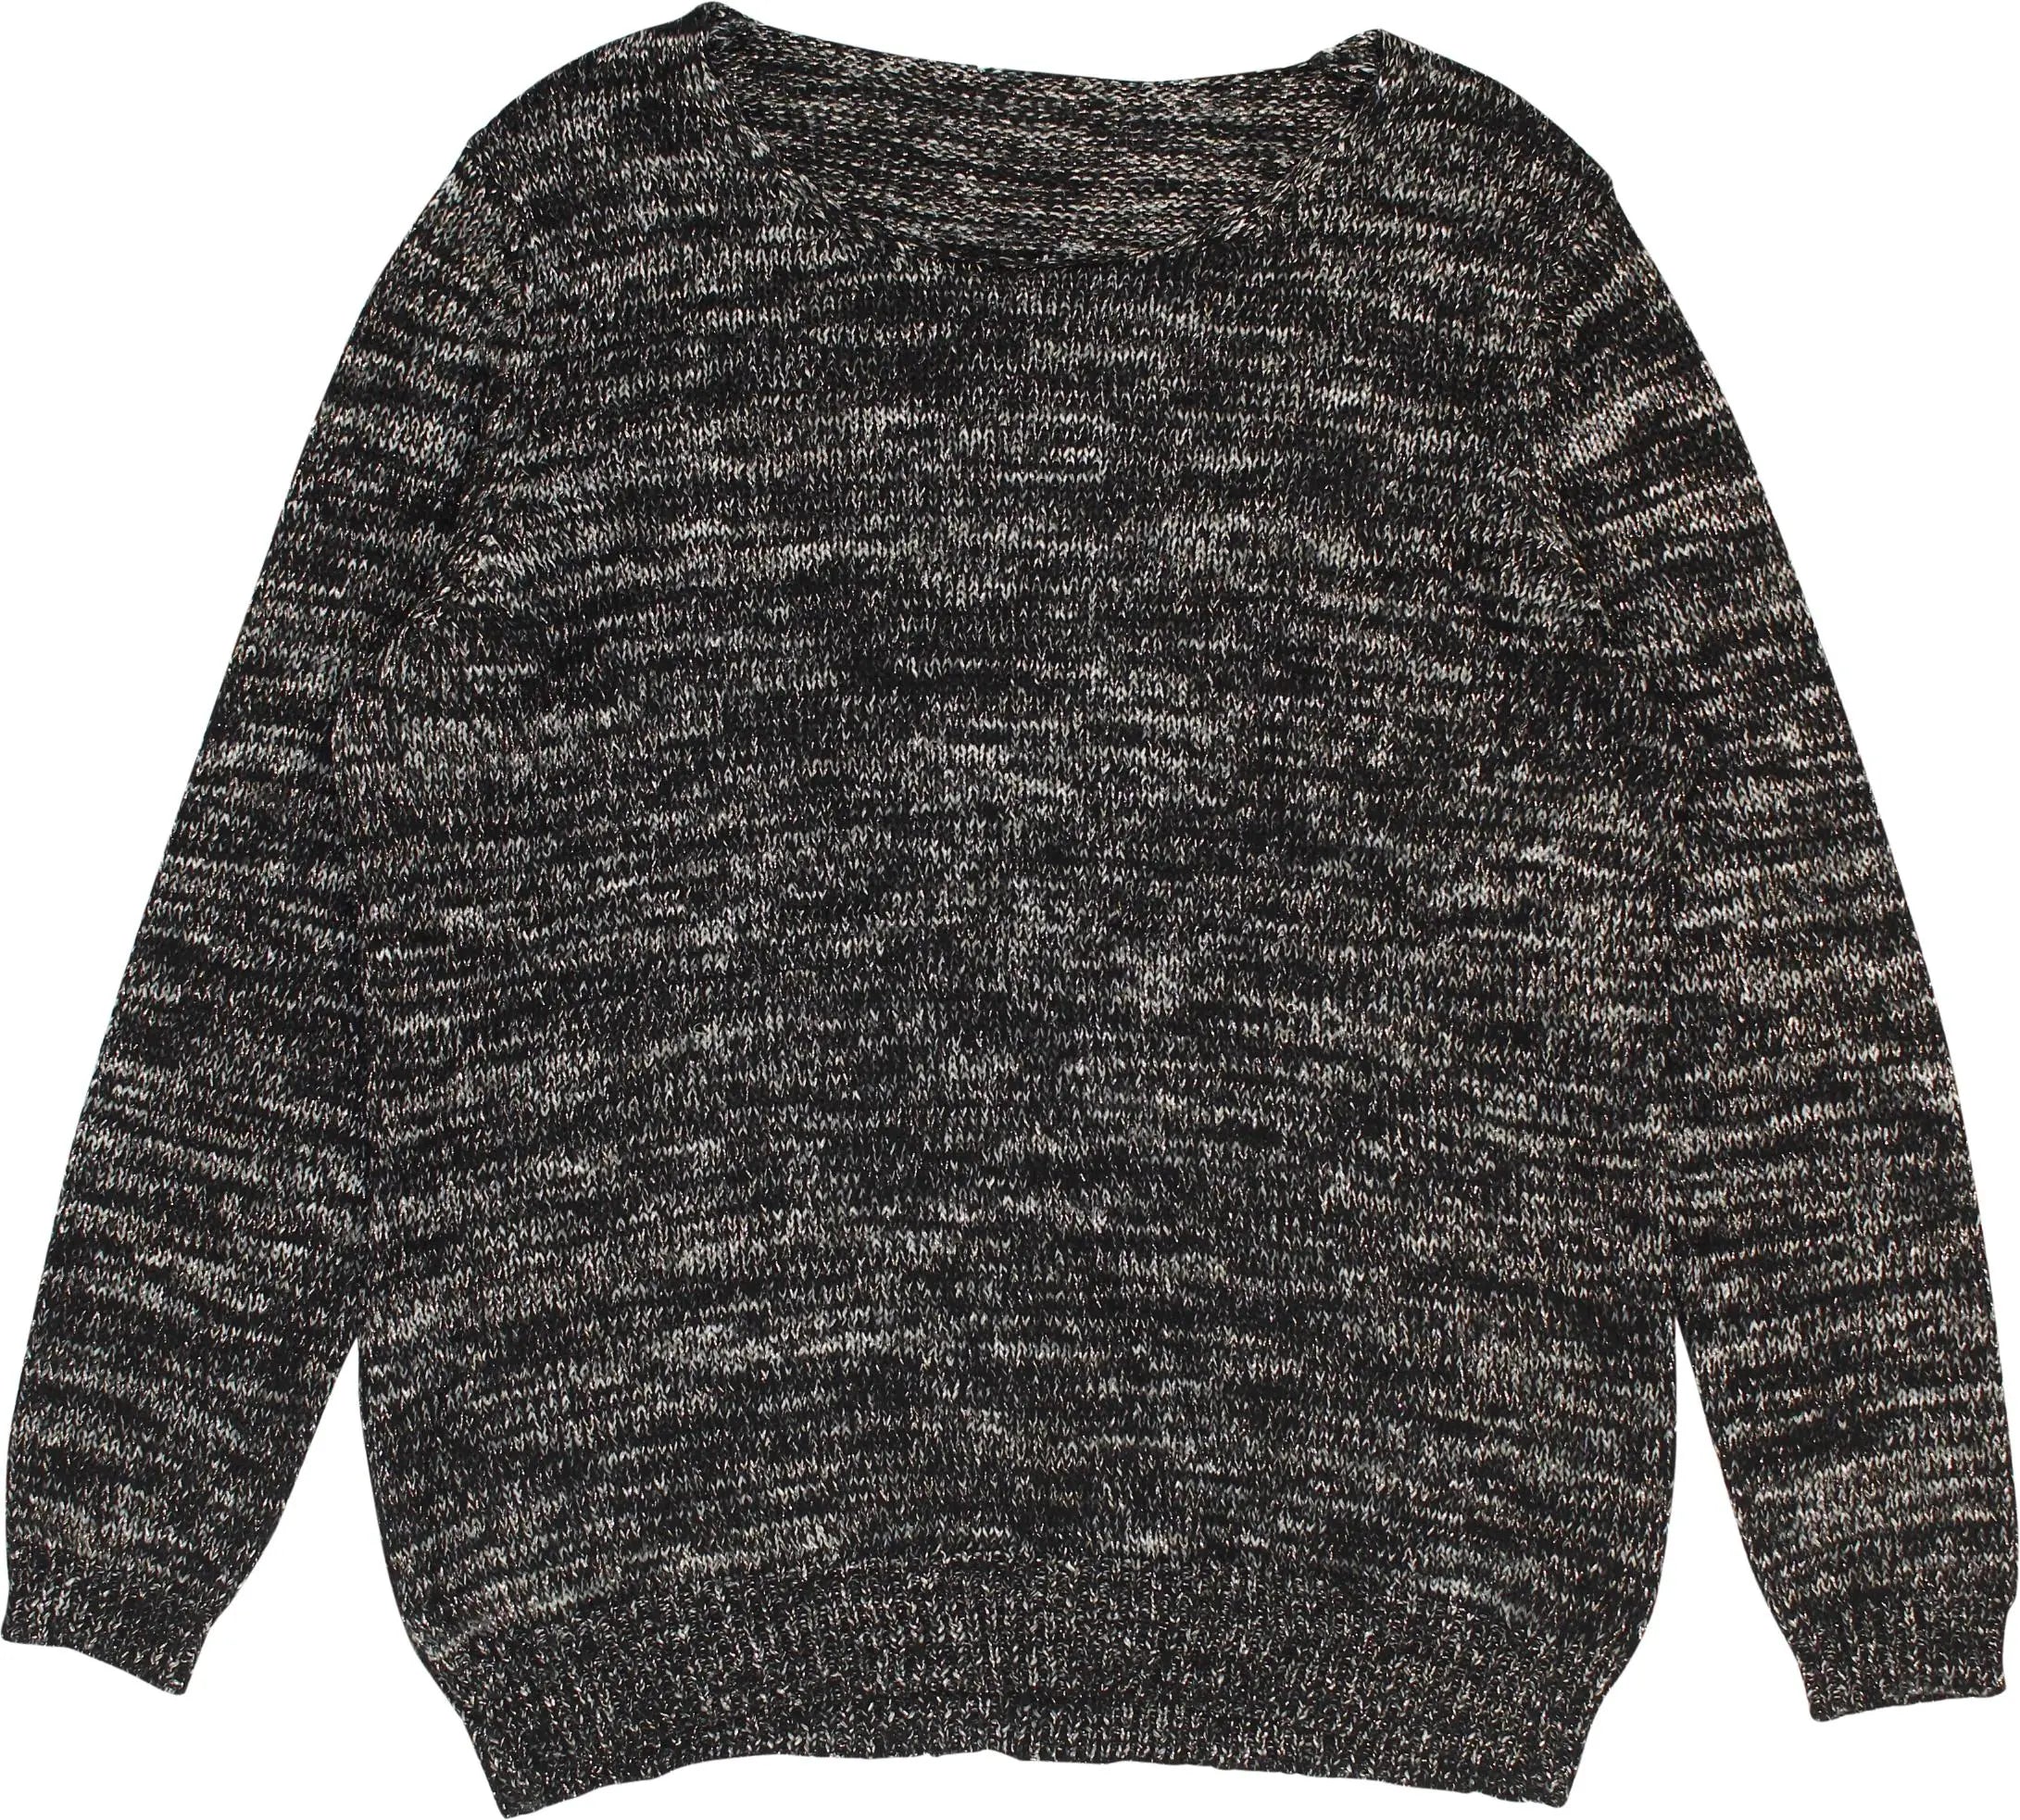 C&A - Black Round Neck Jumper- ThriftTale.com - Vintage and second handclothing